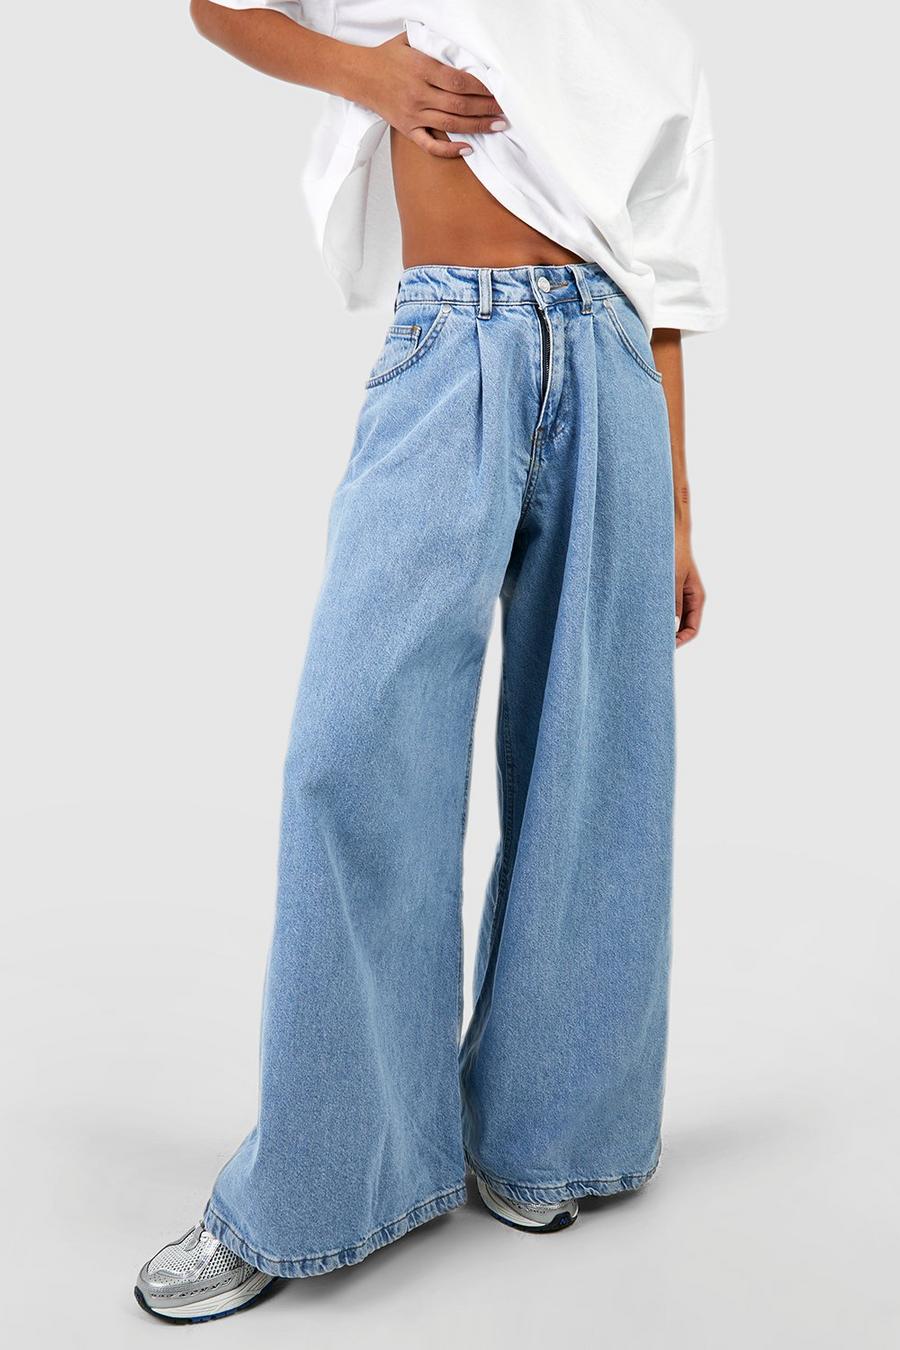 XS-XL Size Women's Stretch Loose Full Length Jeans Wide Leg Flare